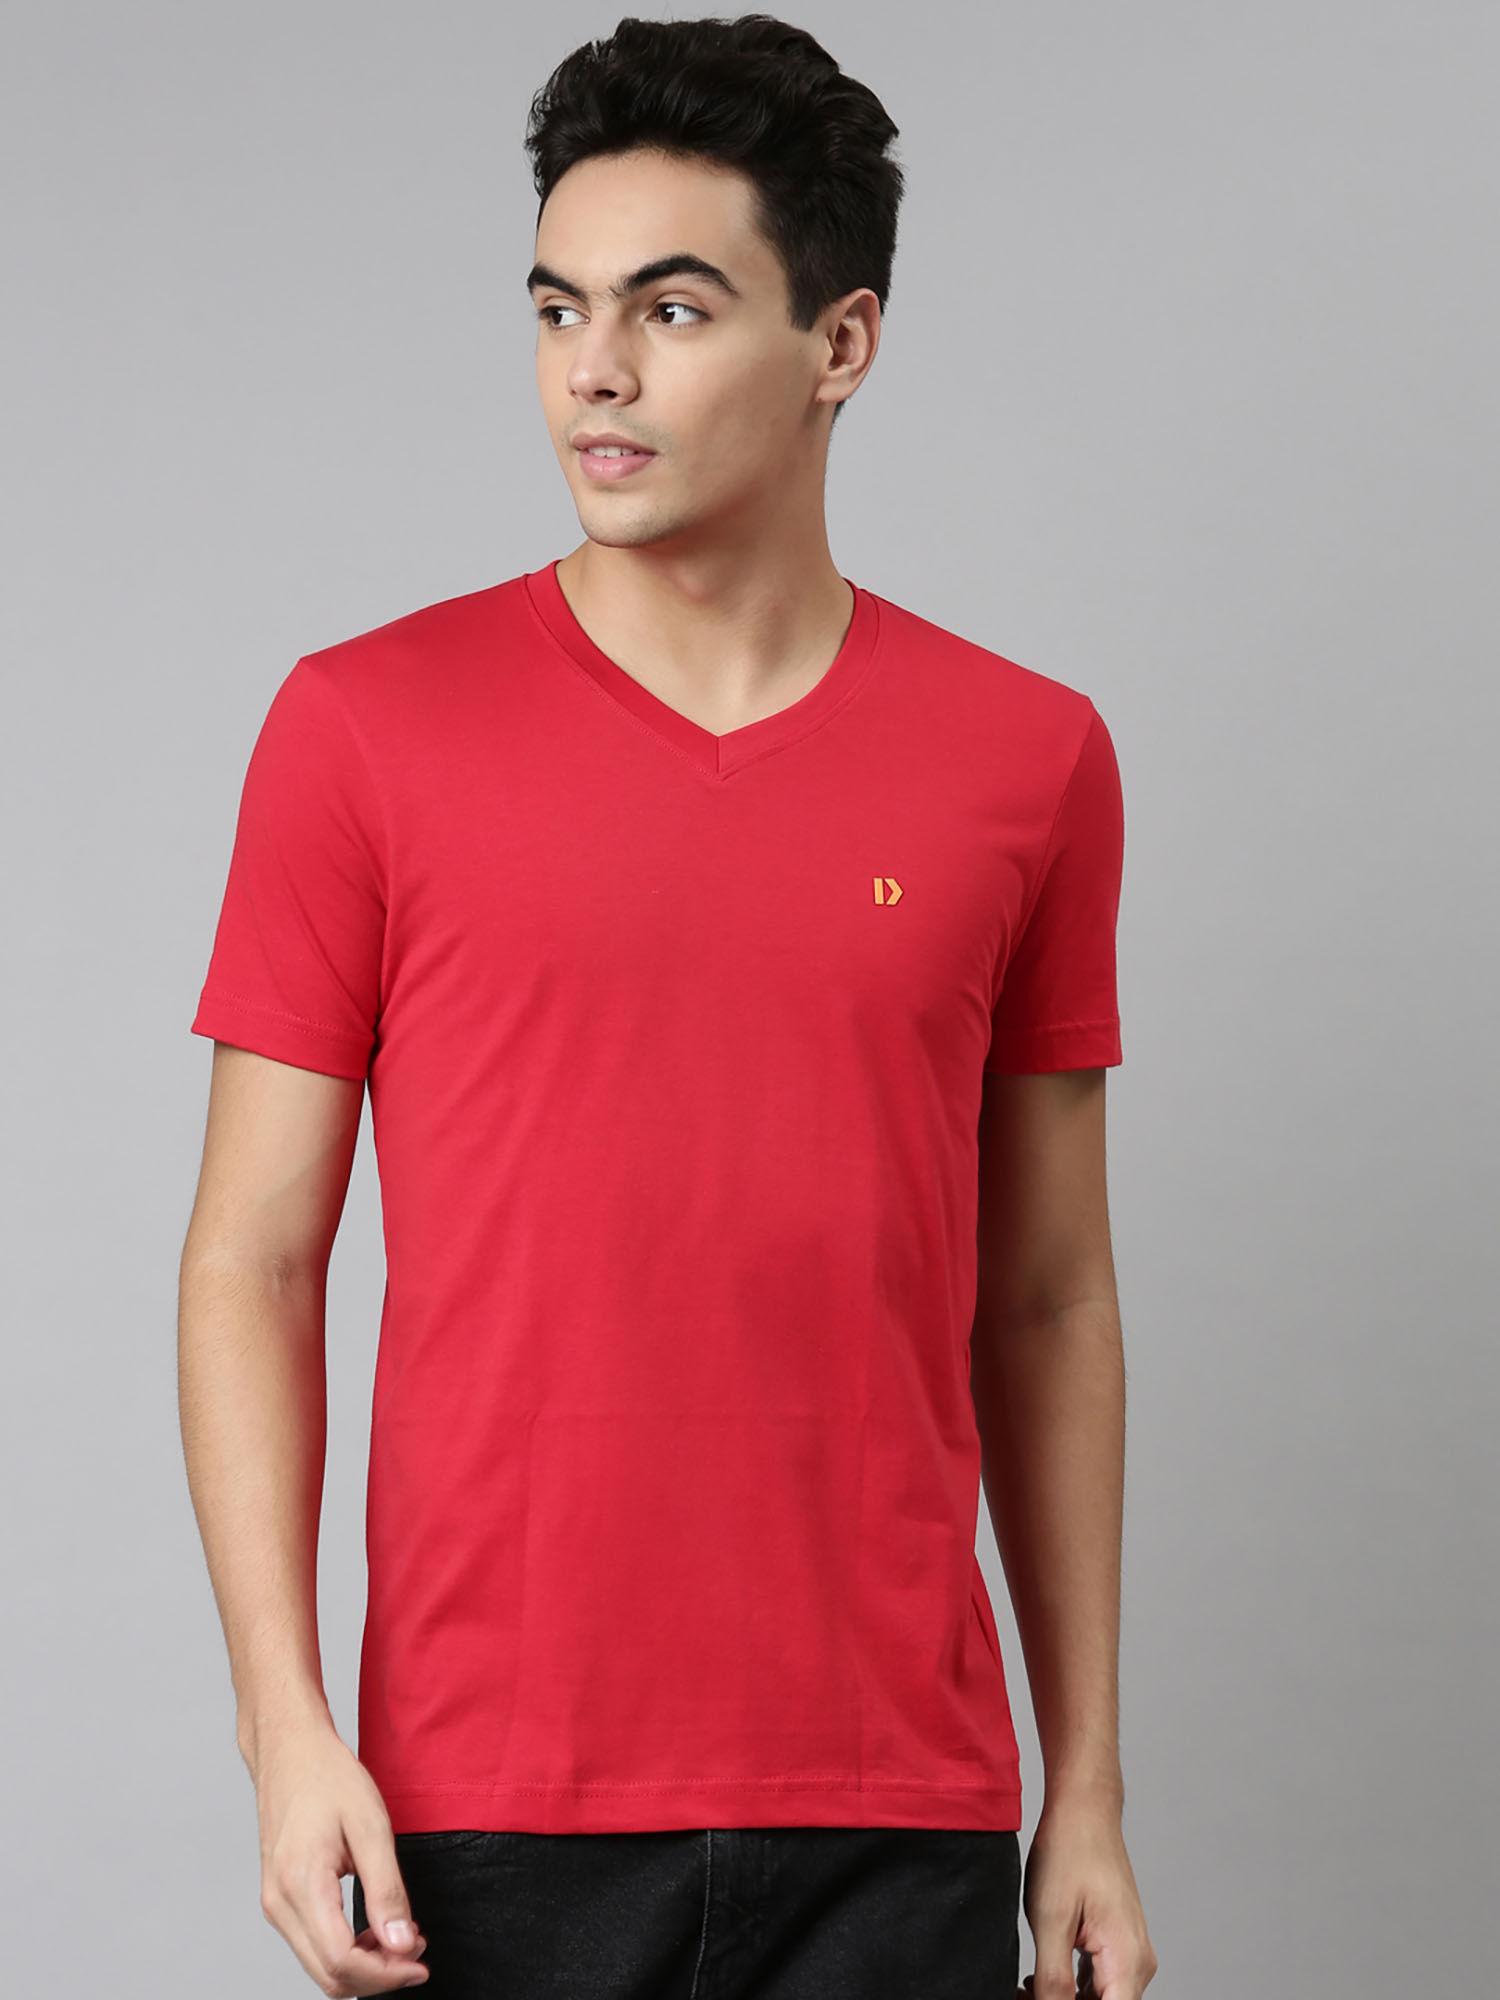 maximus-mens-anti-microbial-finish-v-neck-short-sleeve-solid-t-shirt-red